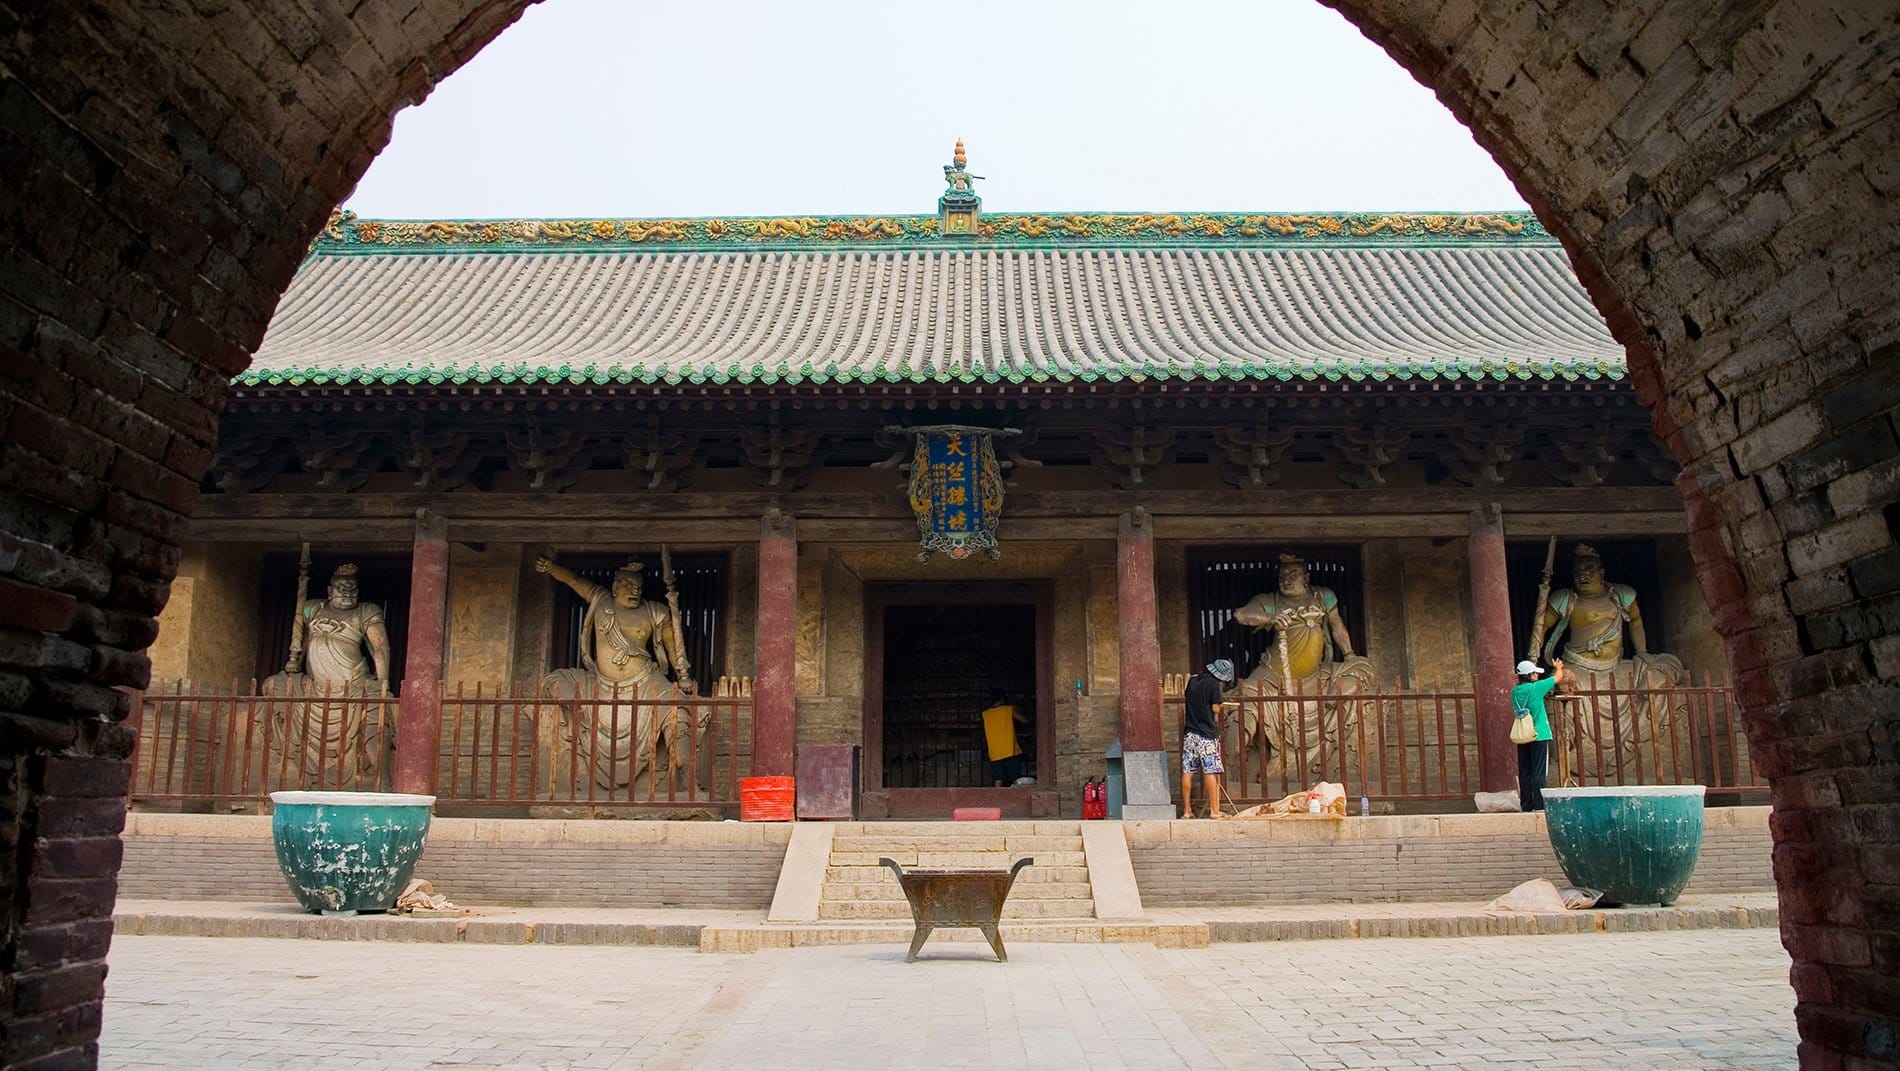 Shuanglin Temple~Because of such vicissitudes as the Cultural Revolution, it is rare to see well-preserved statues in China. Shuanglin Temple offers the exceptional opportunity to see statues from as early as the Song as well as the  Ming and Qing dynasties. (960-1911)